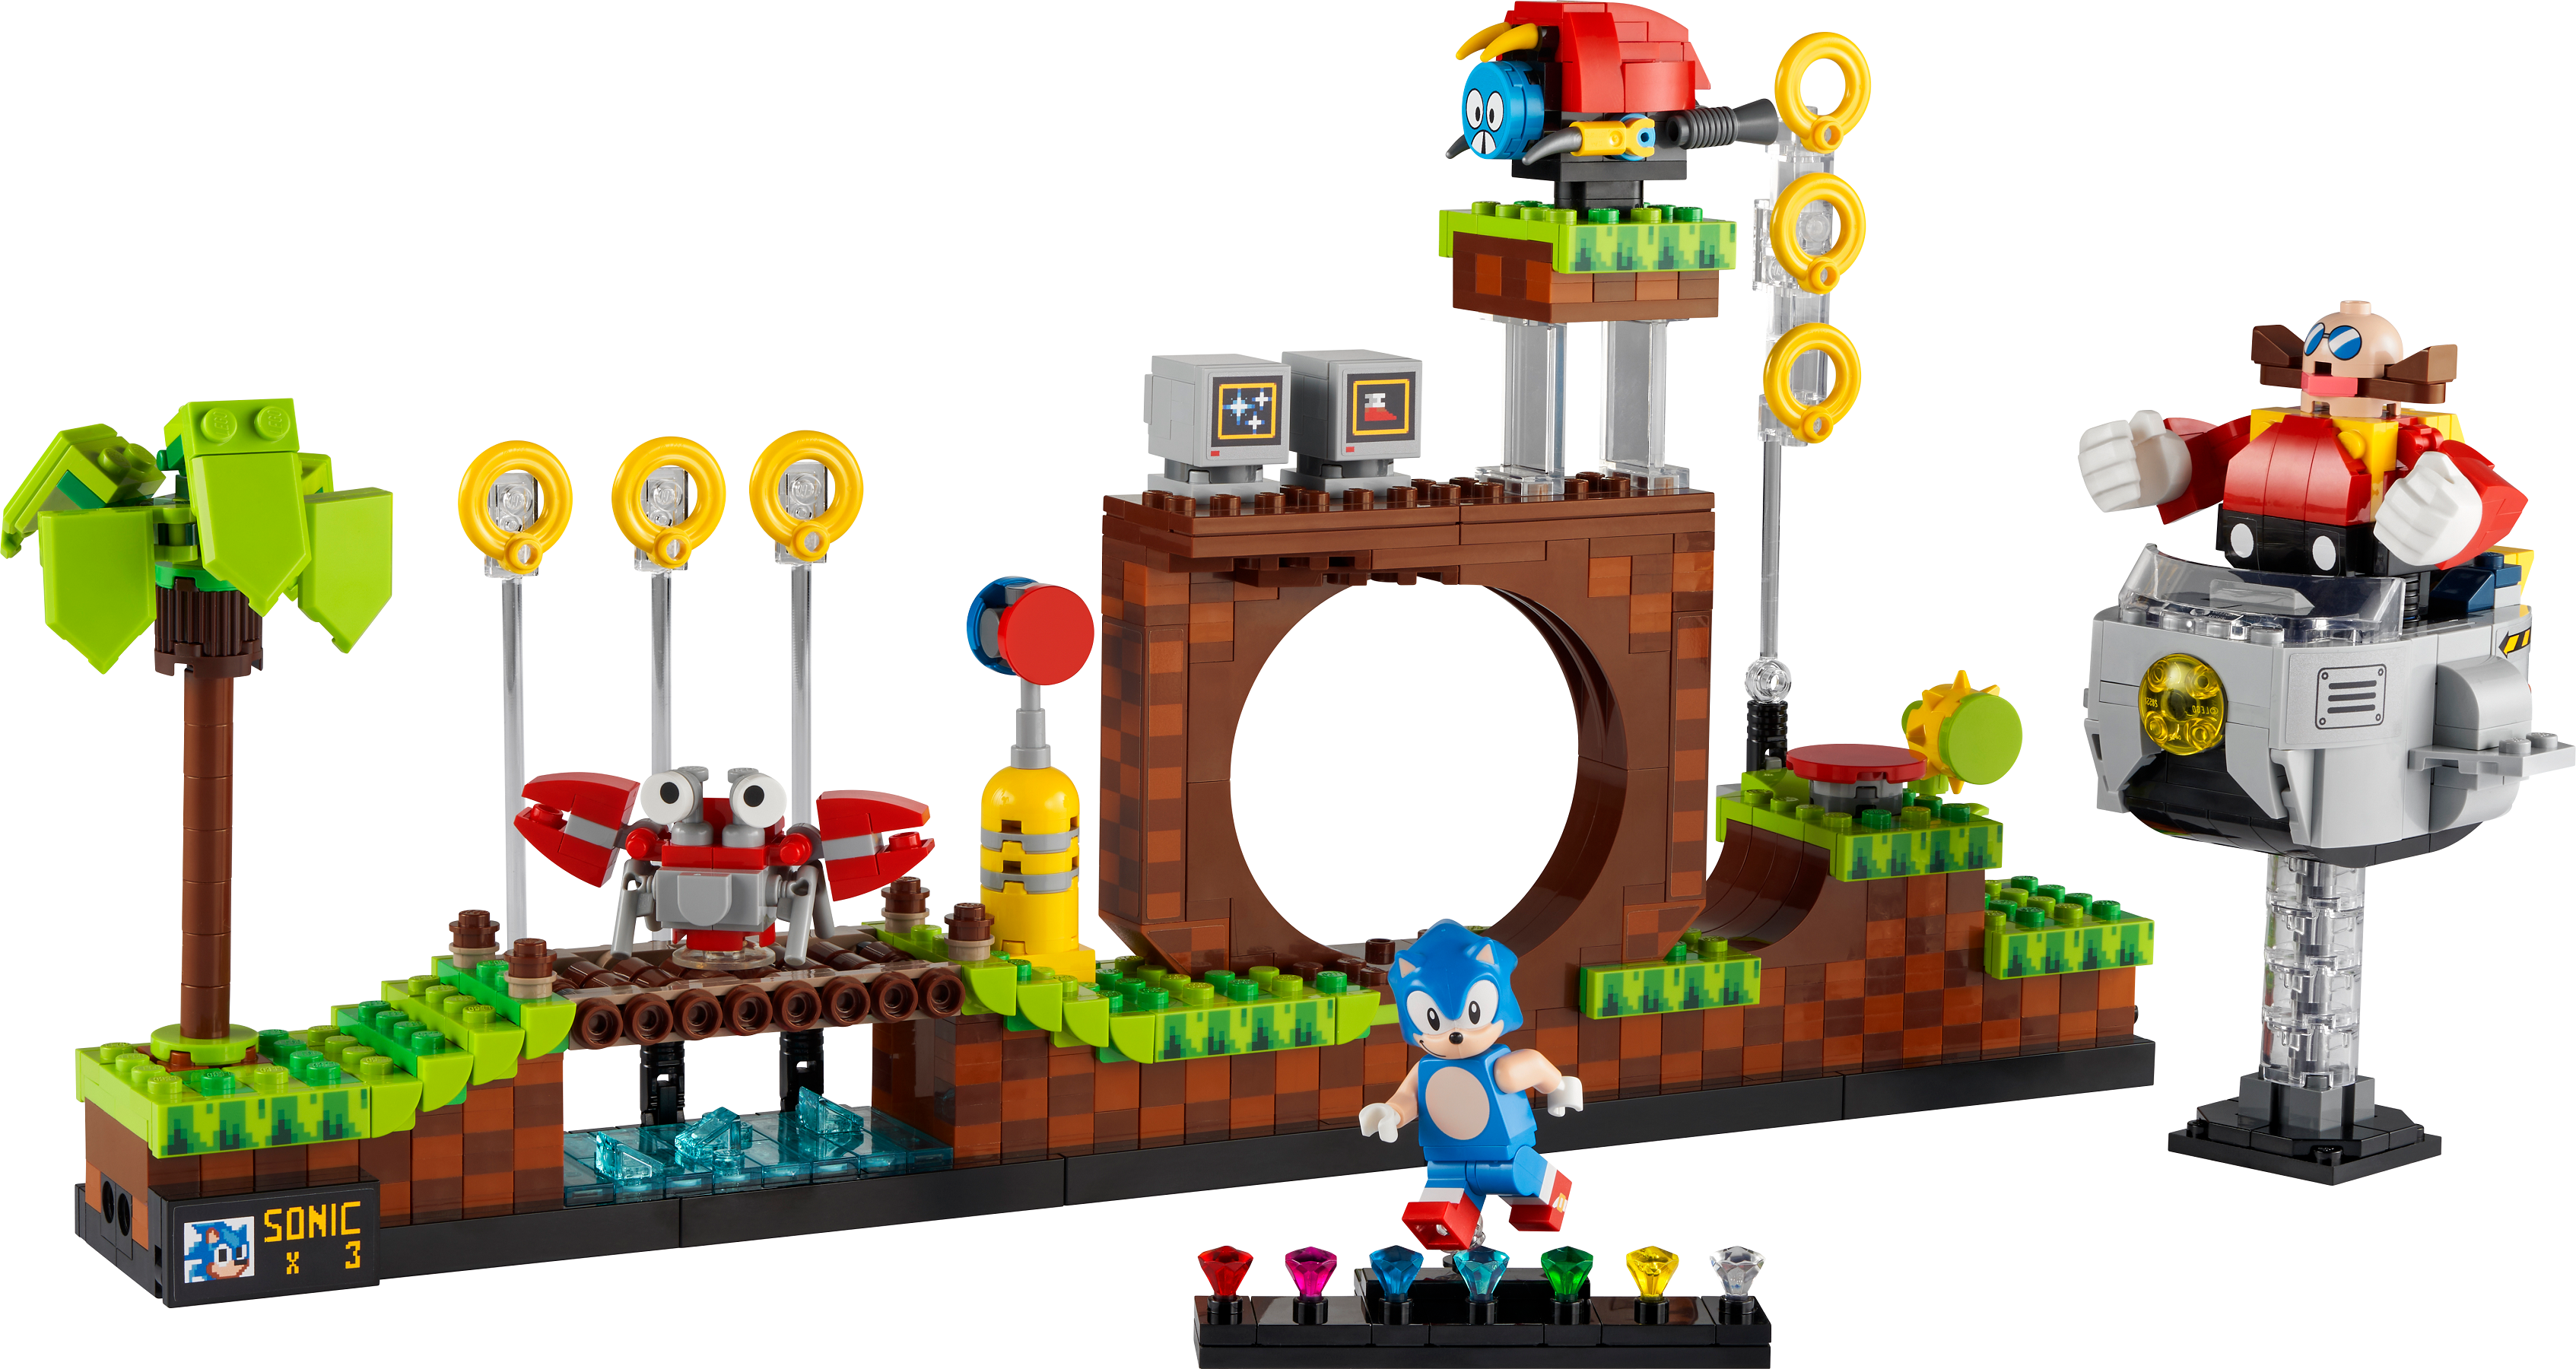 Sonic the Hedgehog™ – Green Hill Zone 21331 LEGO® Sonic the Hedgehog™ | Buy online at the Official LEGO® Shop US